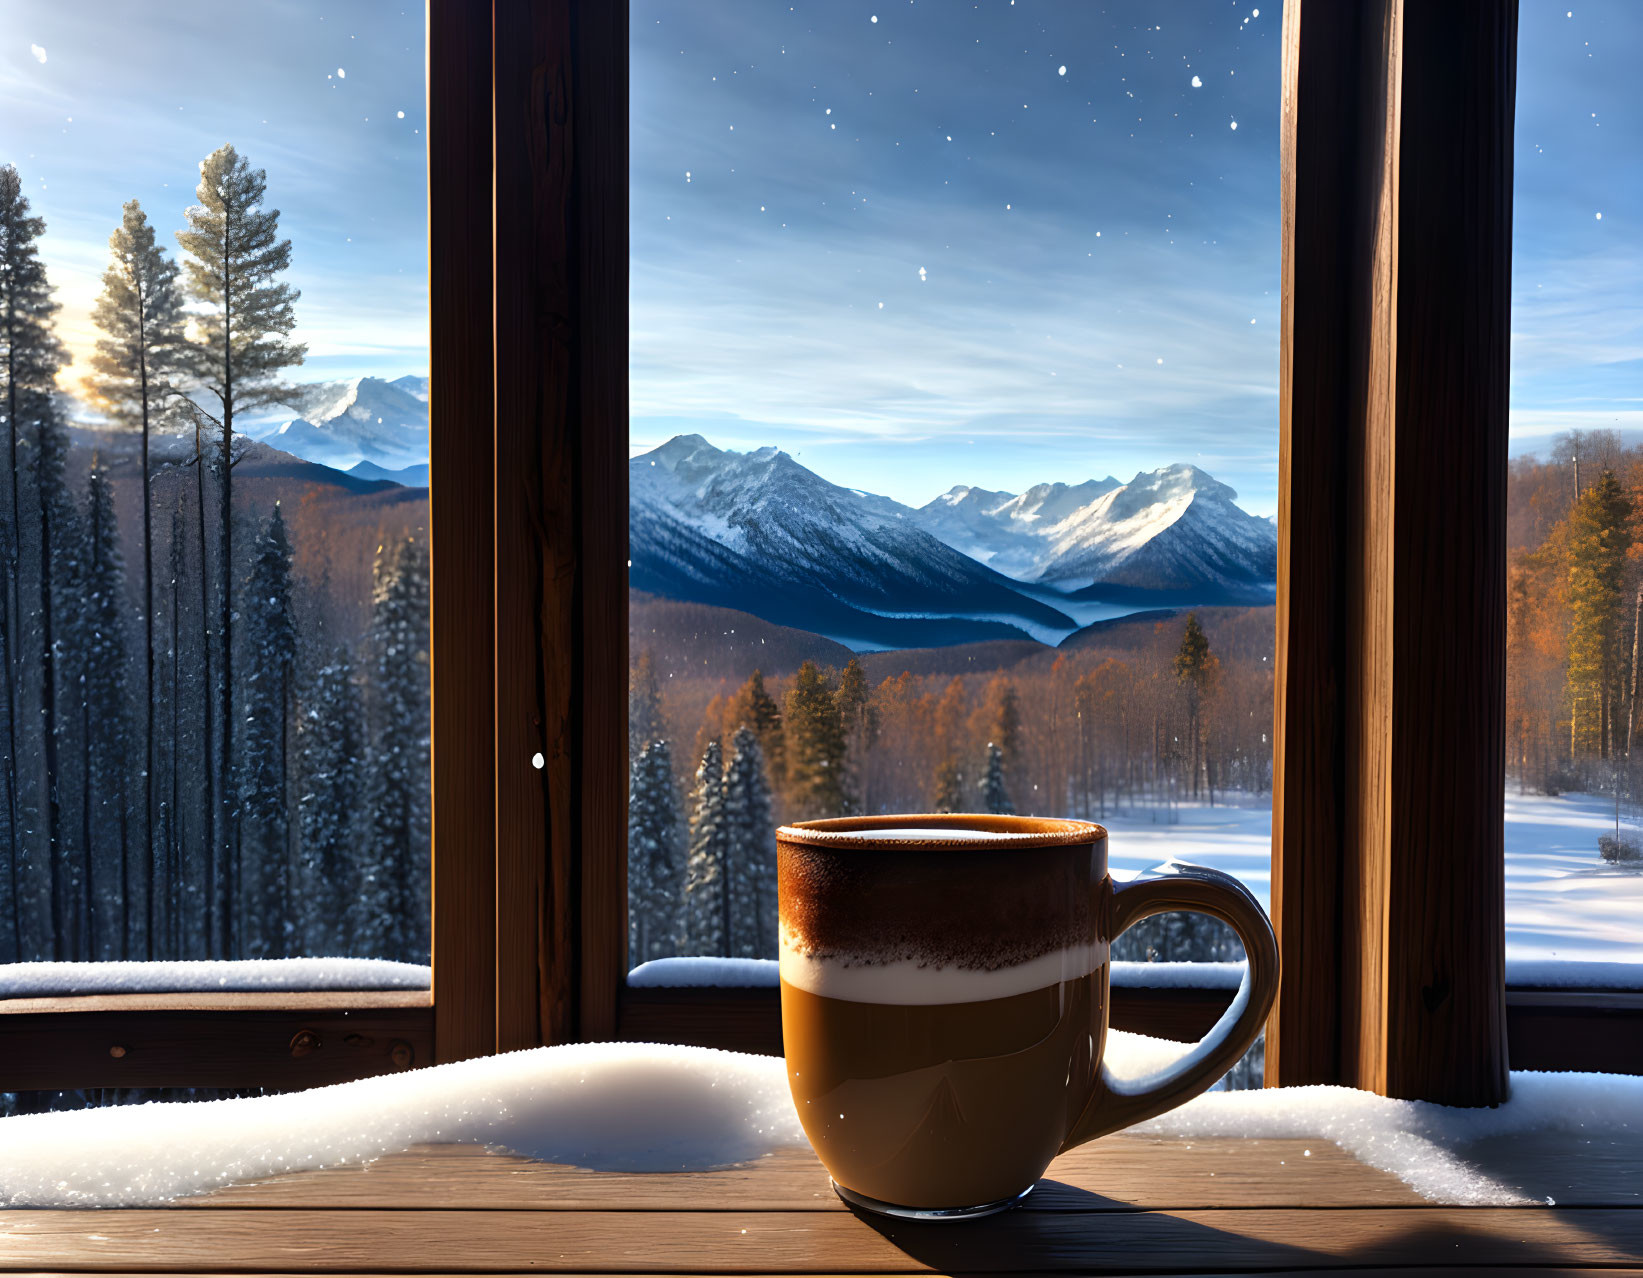 Coffee cup on snowy ledge with mountain view from cabin porch at twilight